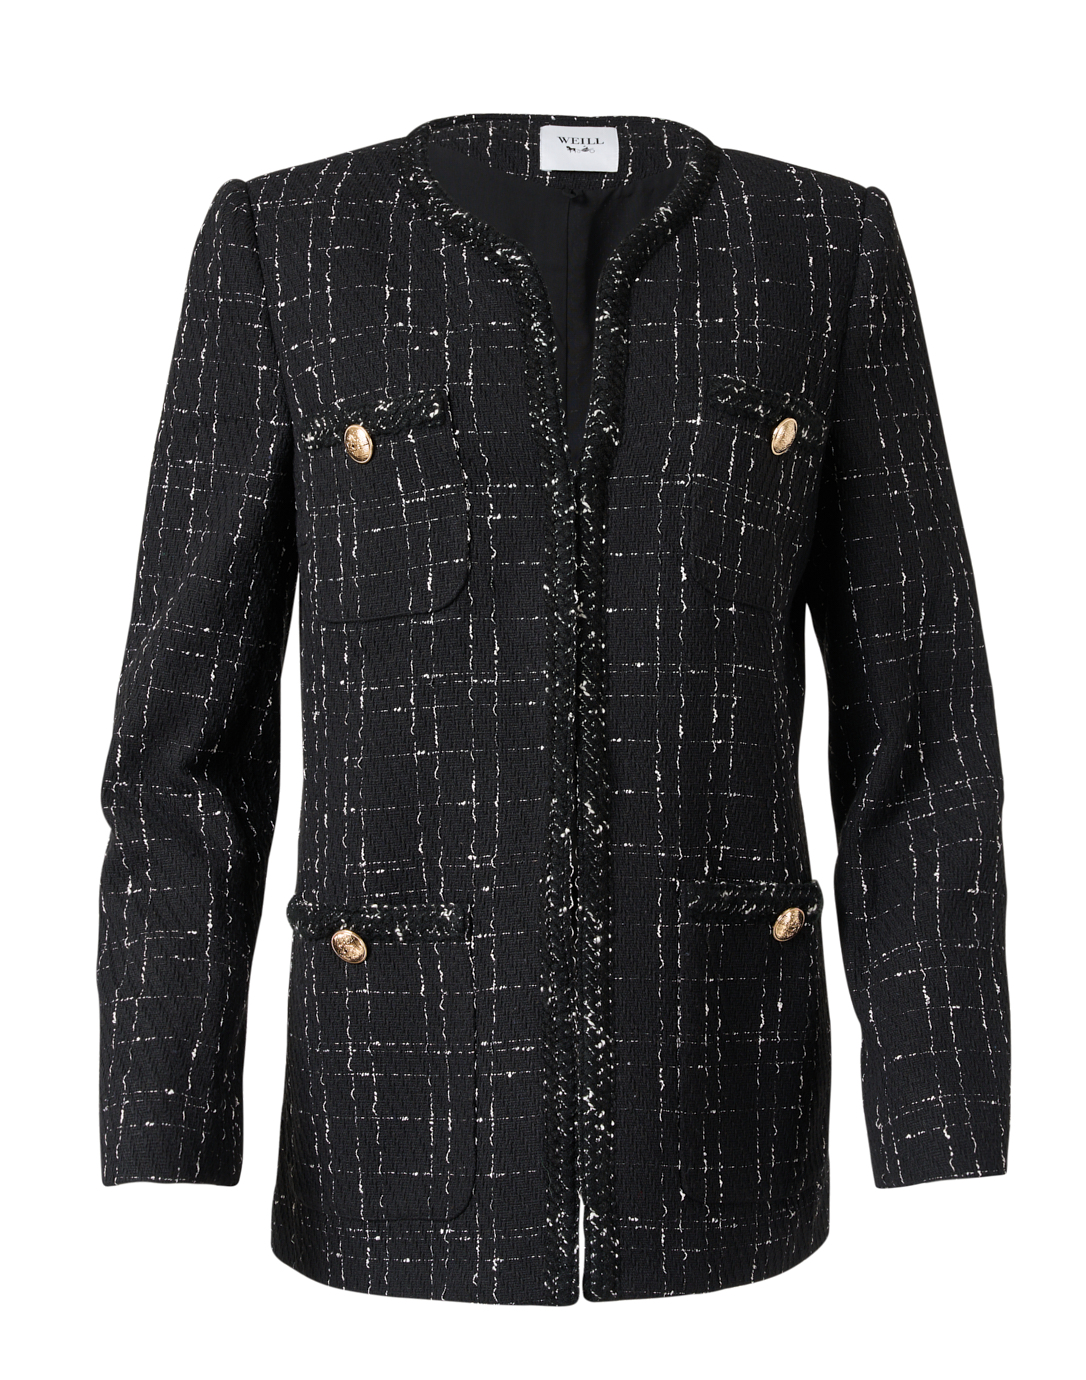 Chanel style bouclé or tweed jackets for winter warmth with style